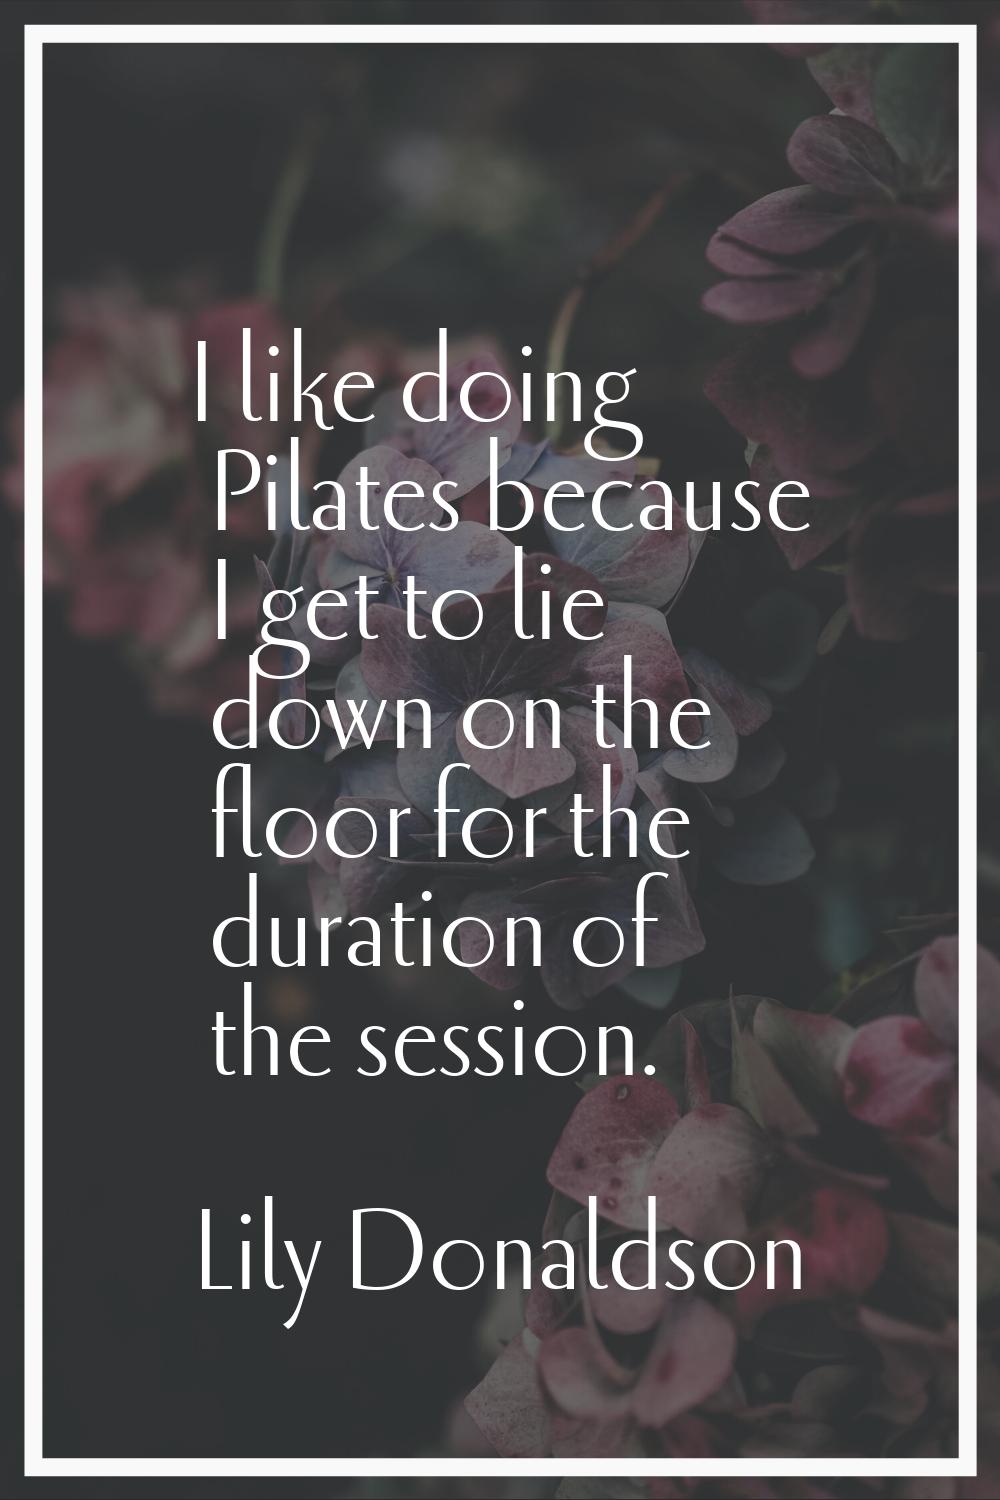 I like doing Pilates because I get to lie down on the floor for the duration of the session.